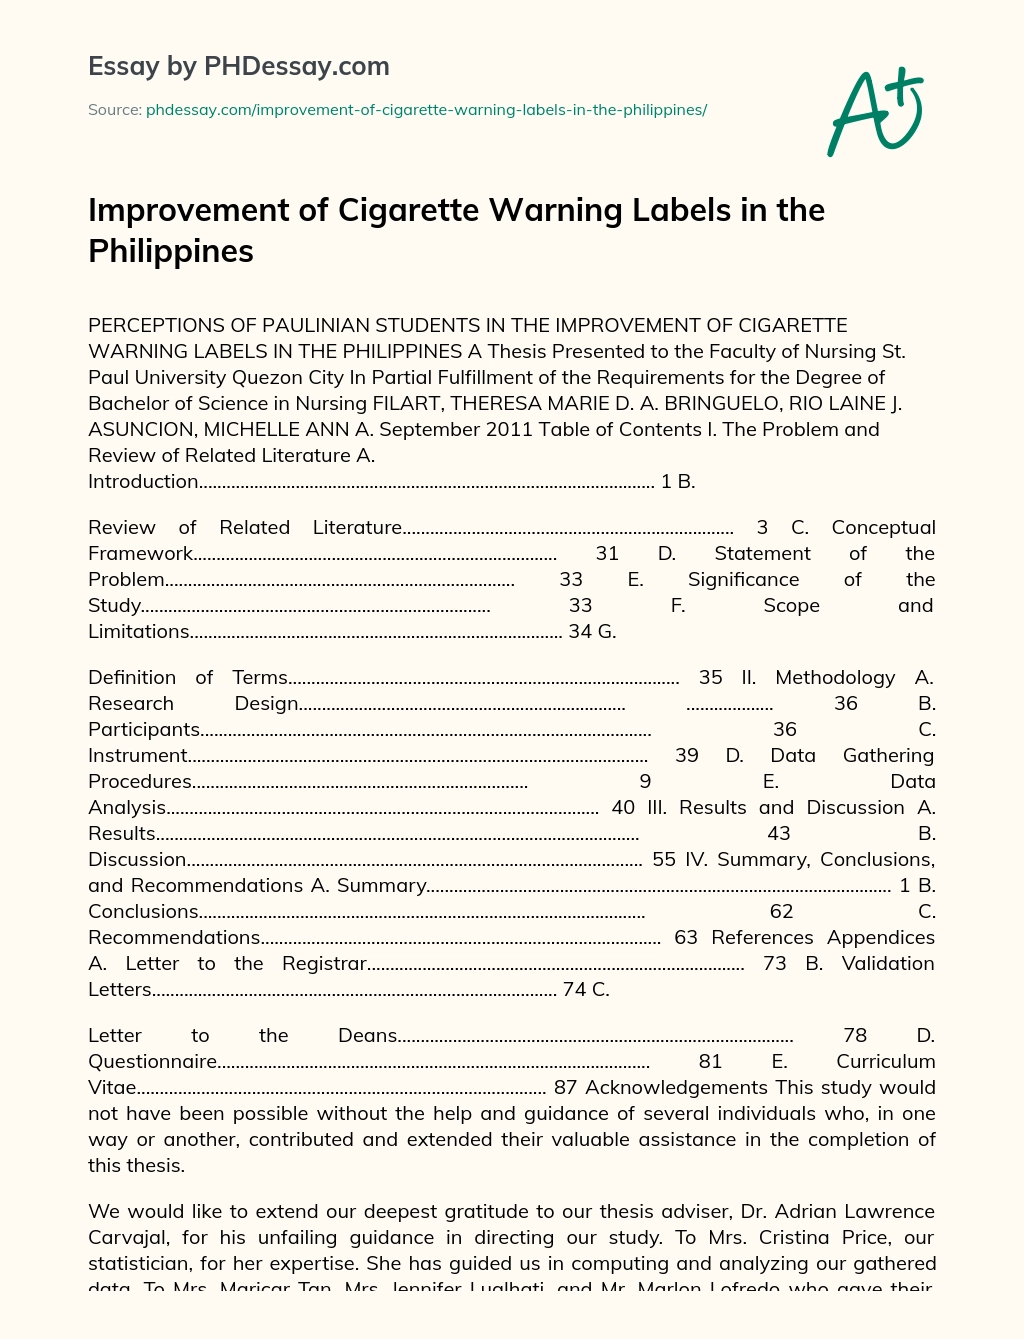 Improvement of Cigarette Warning Labels in the Philippines essay